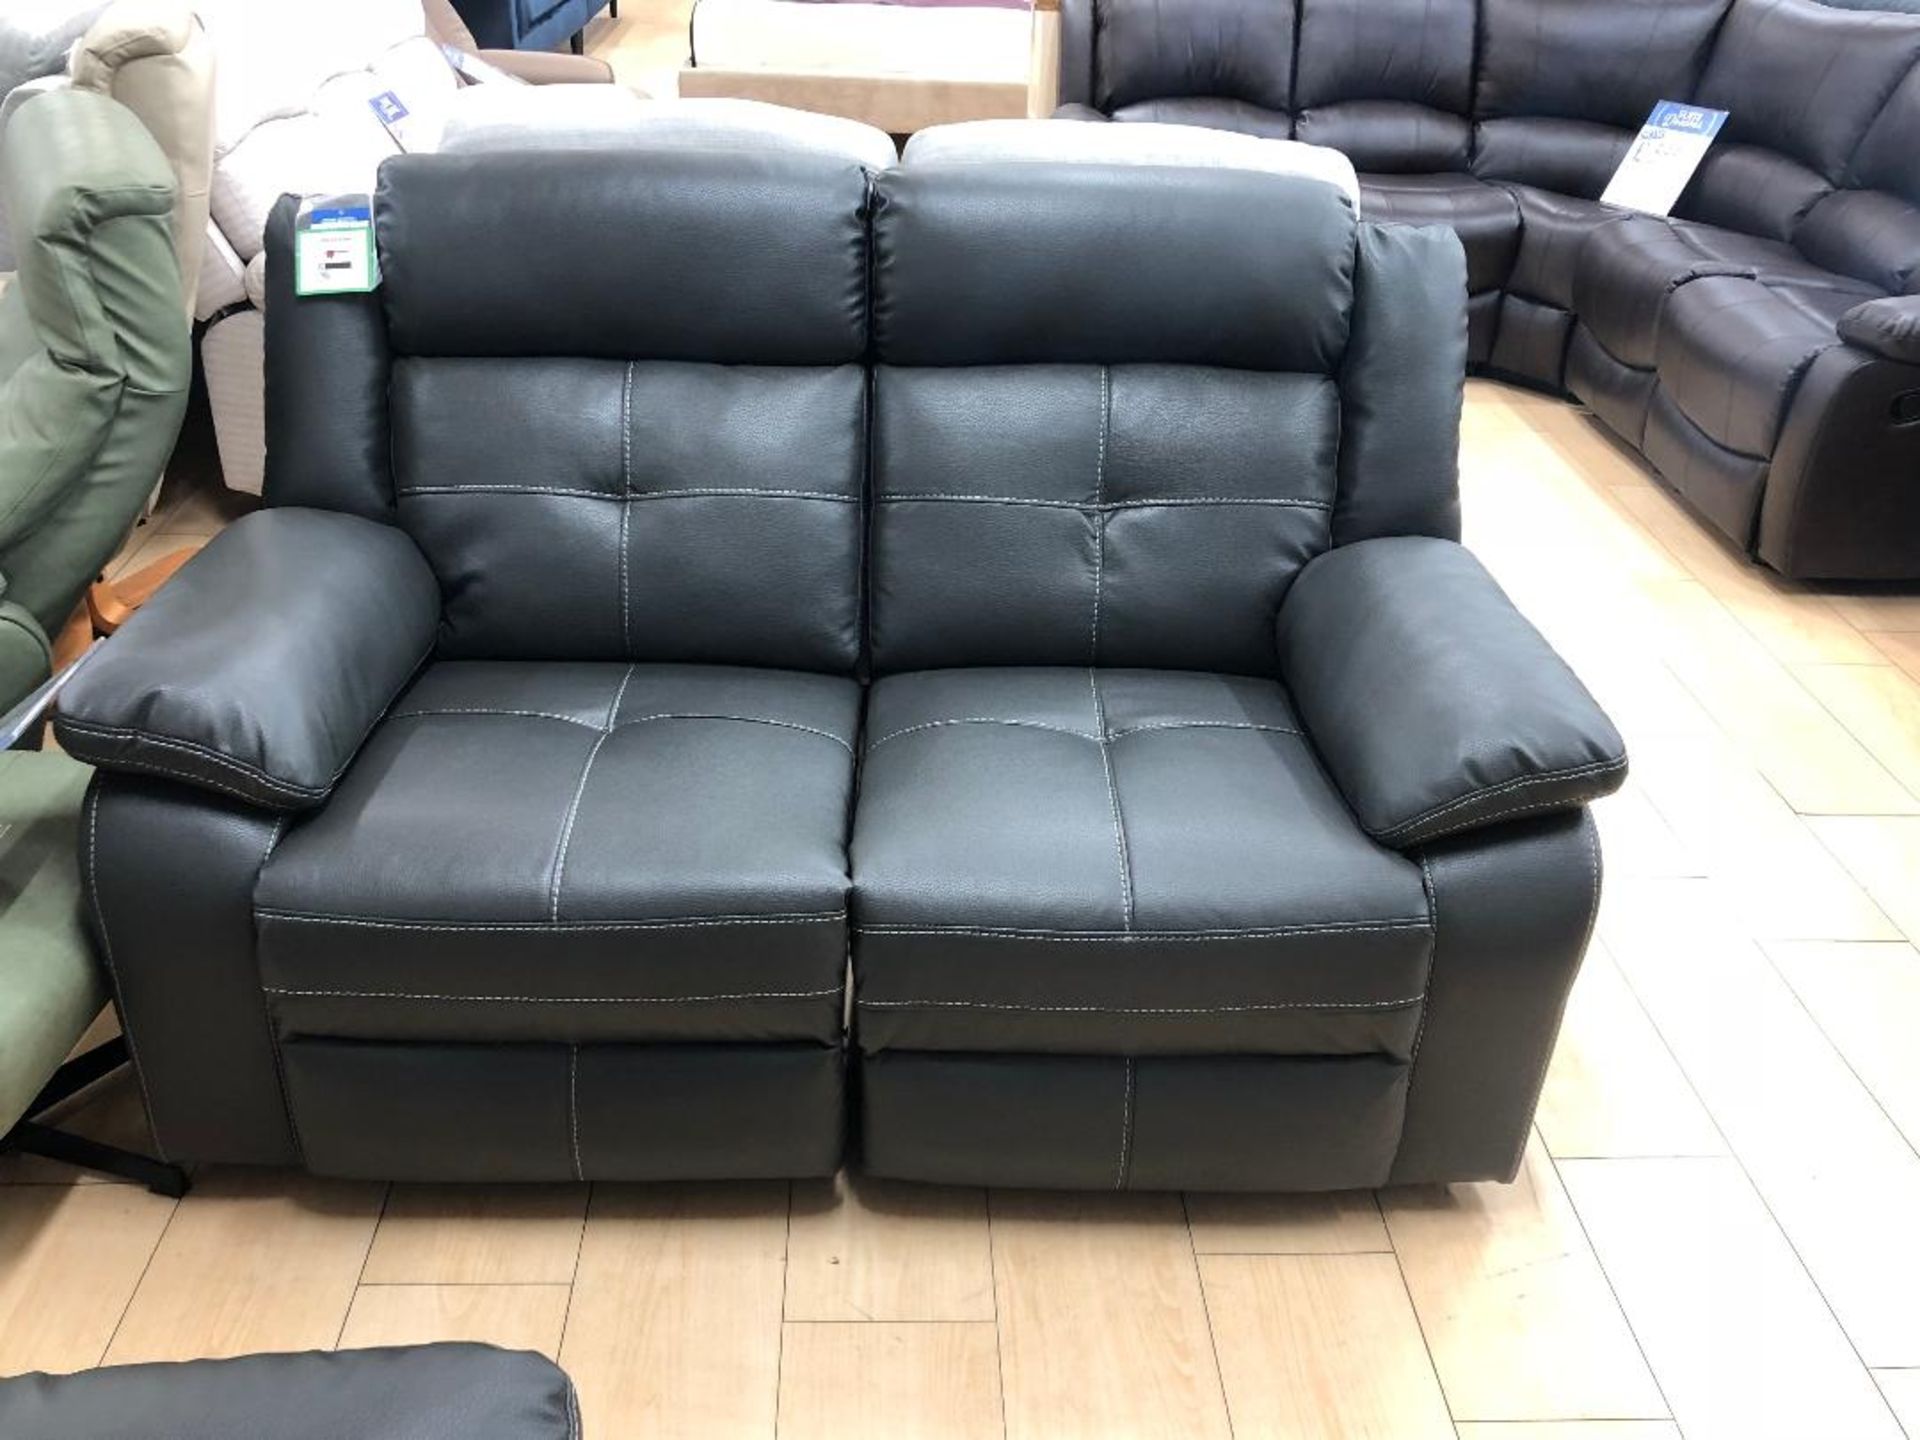 Brand new boxed 3 seater plus 2 seater harveys langdale reclining sofas - Image 2 of 2